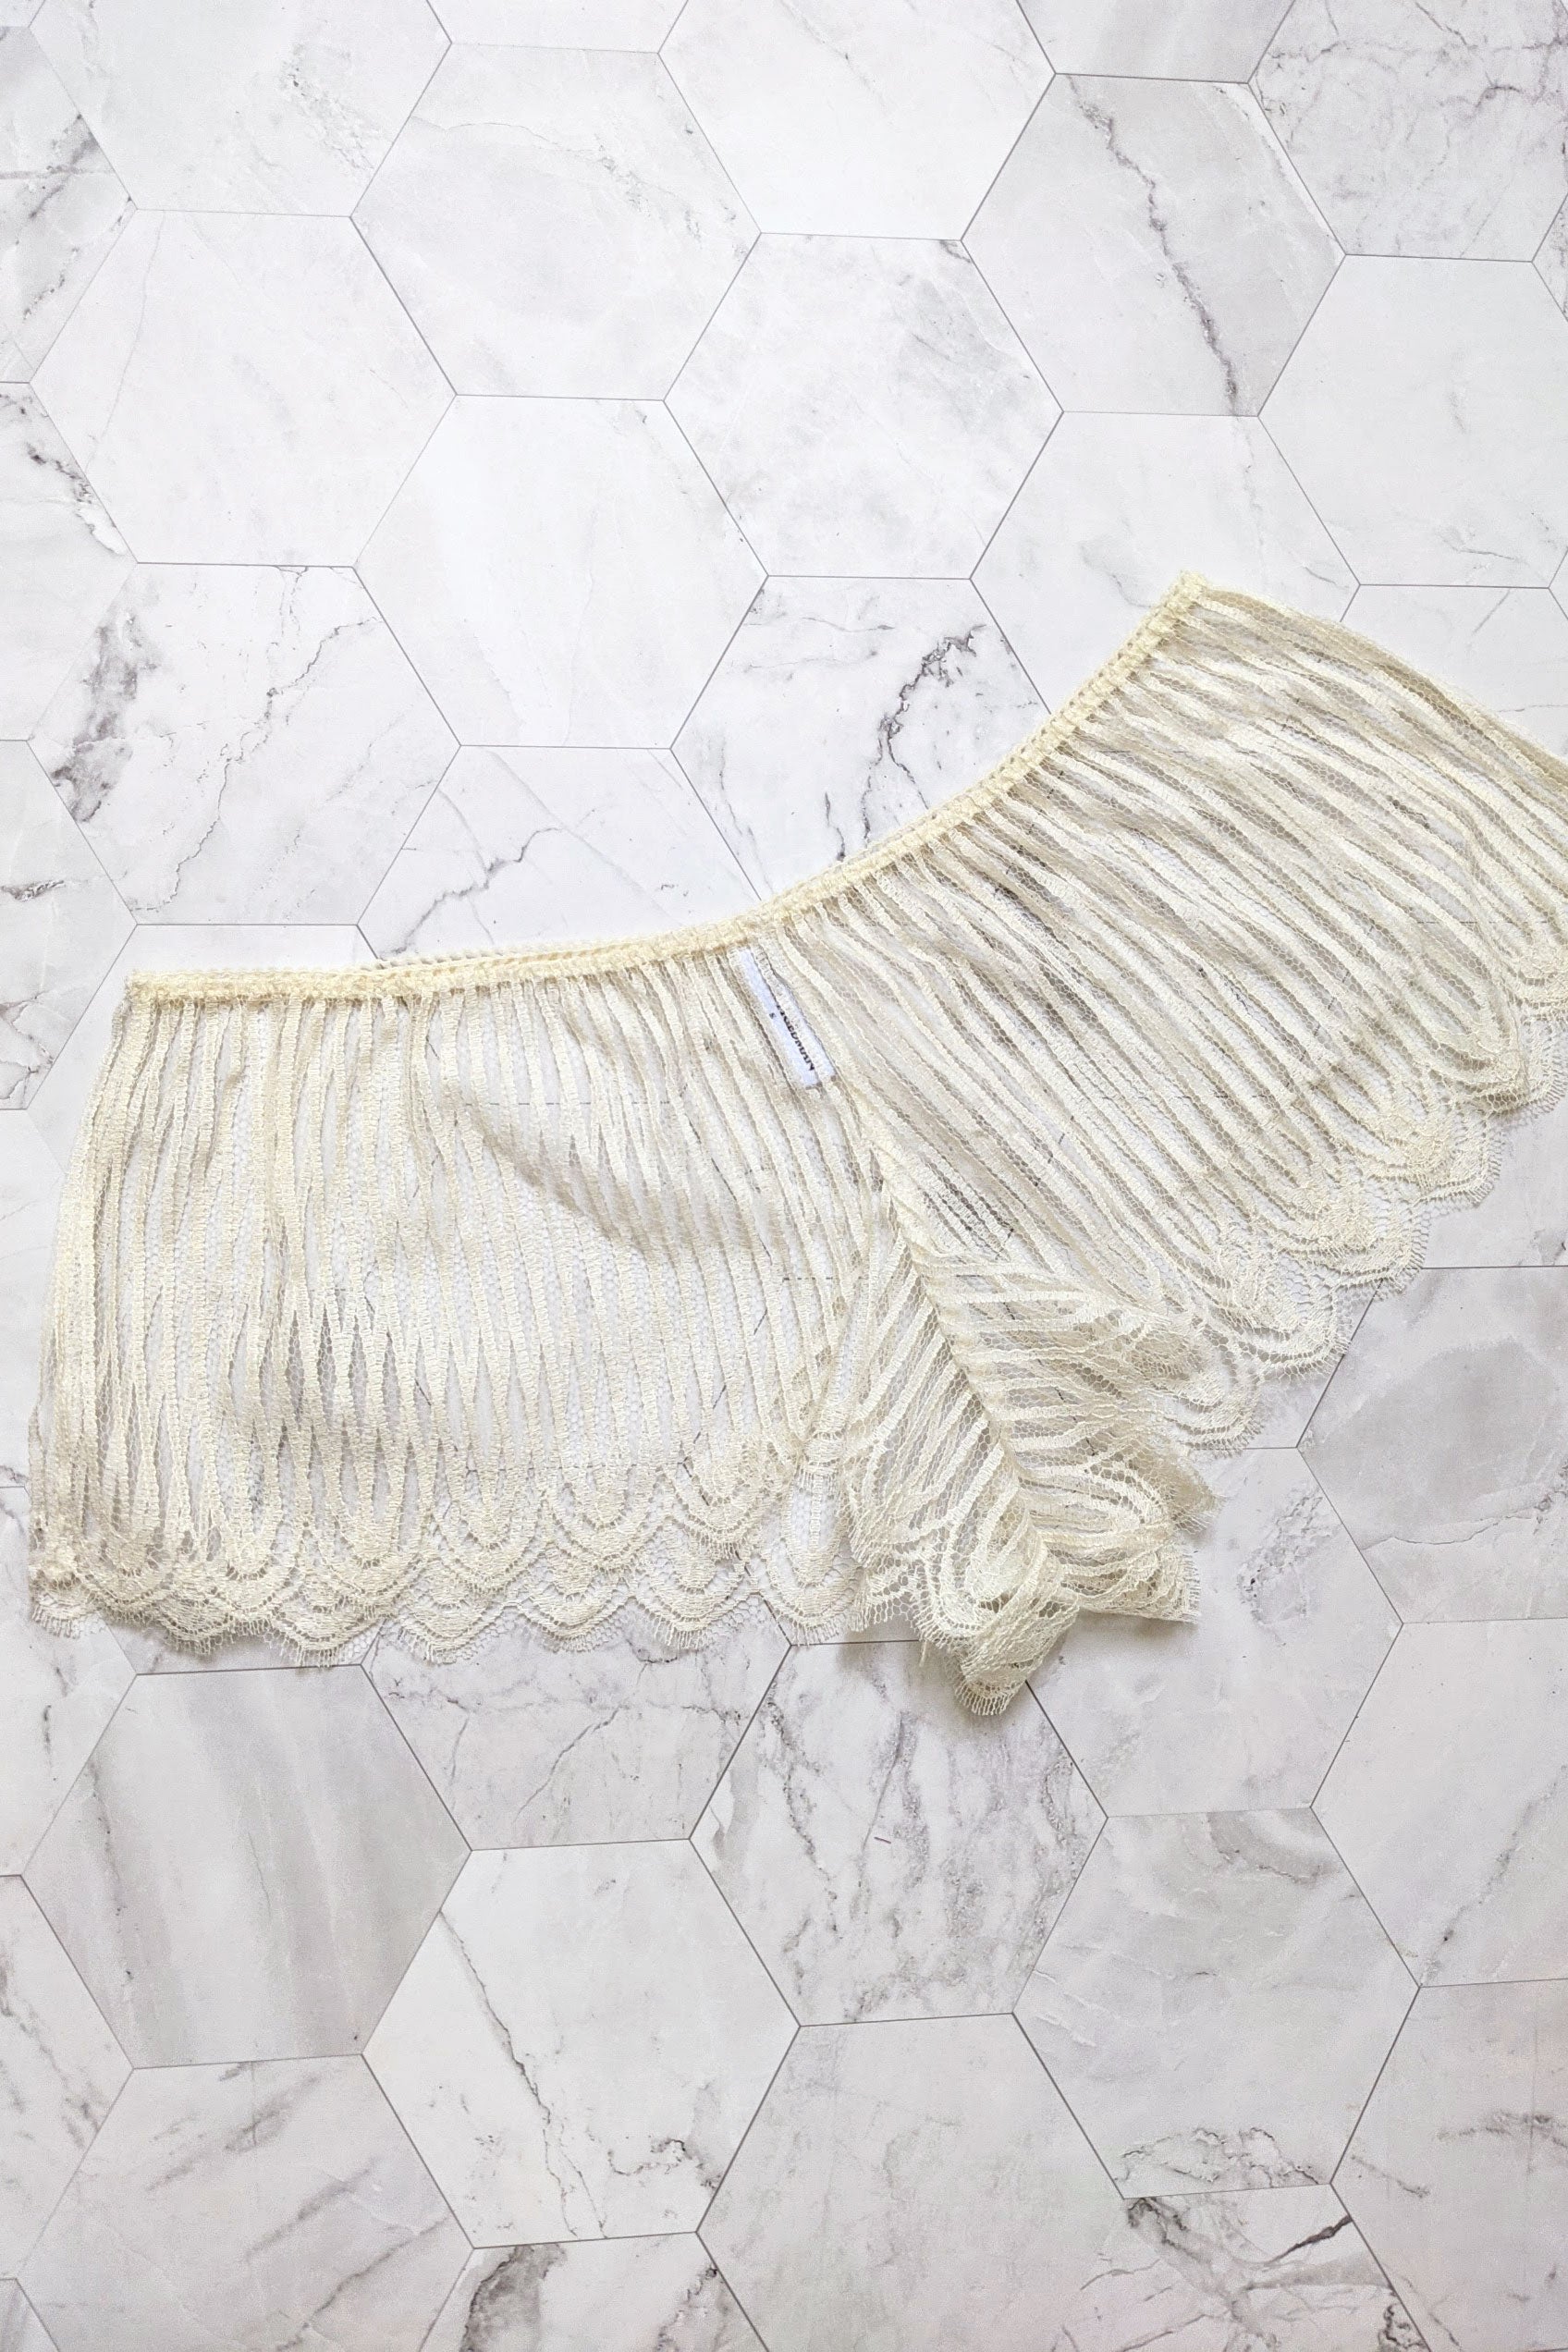 Ivory Dentelle shorts handmade in french lace